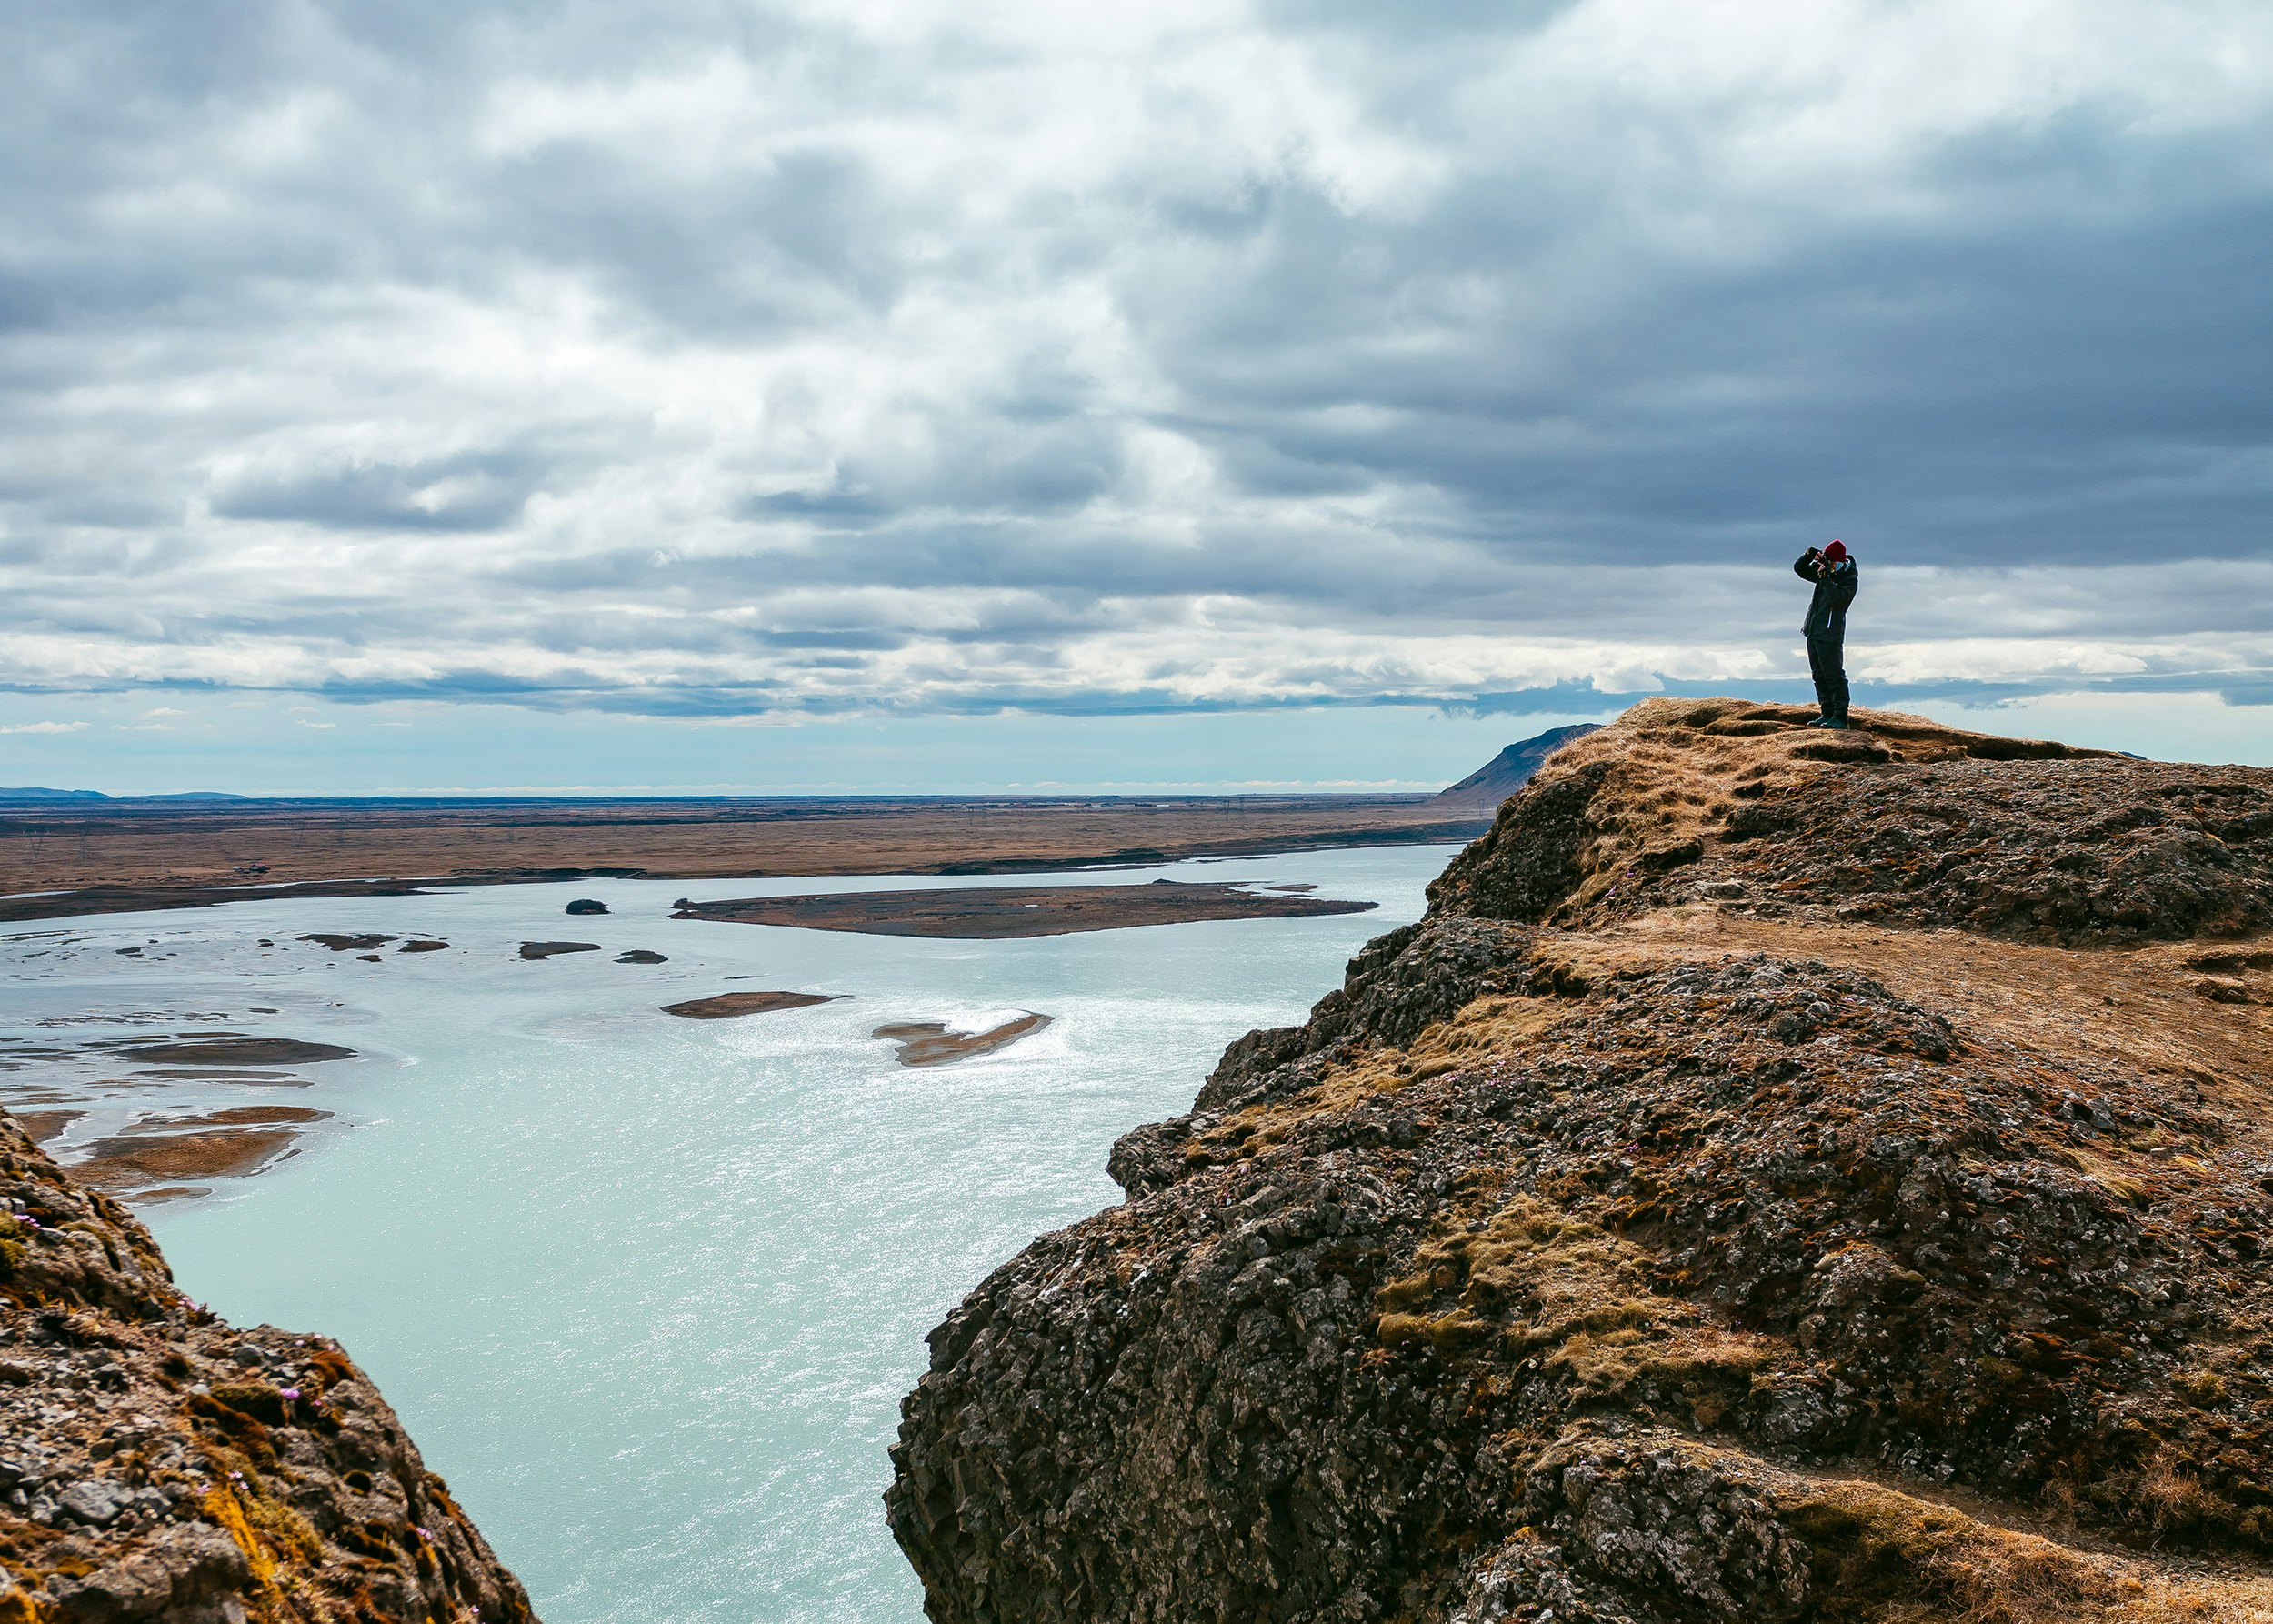 person standing on rock formation near body of water during daytime